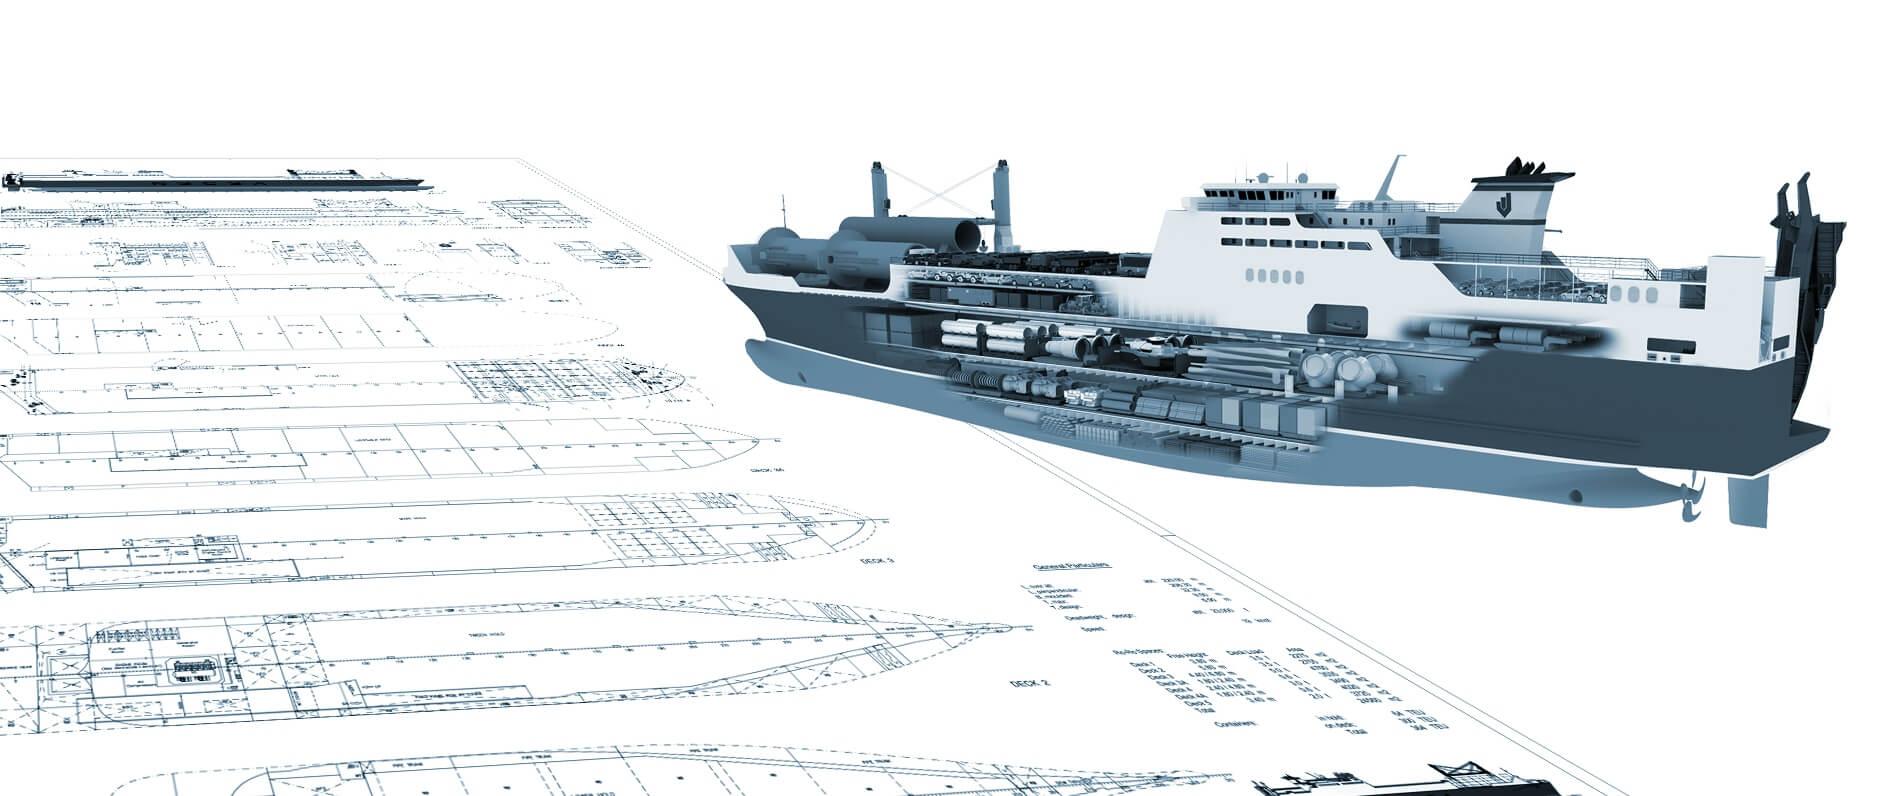 more than 750 vessels built to our designs - knud e. hansen